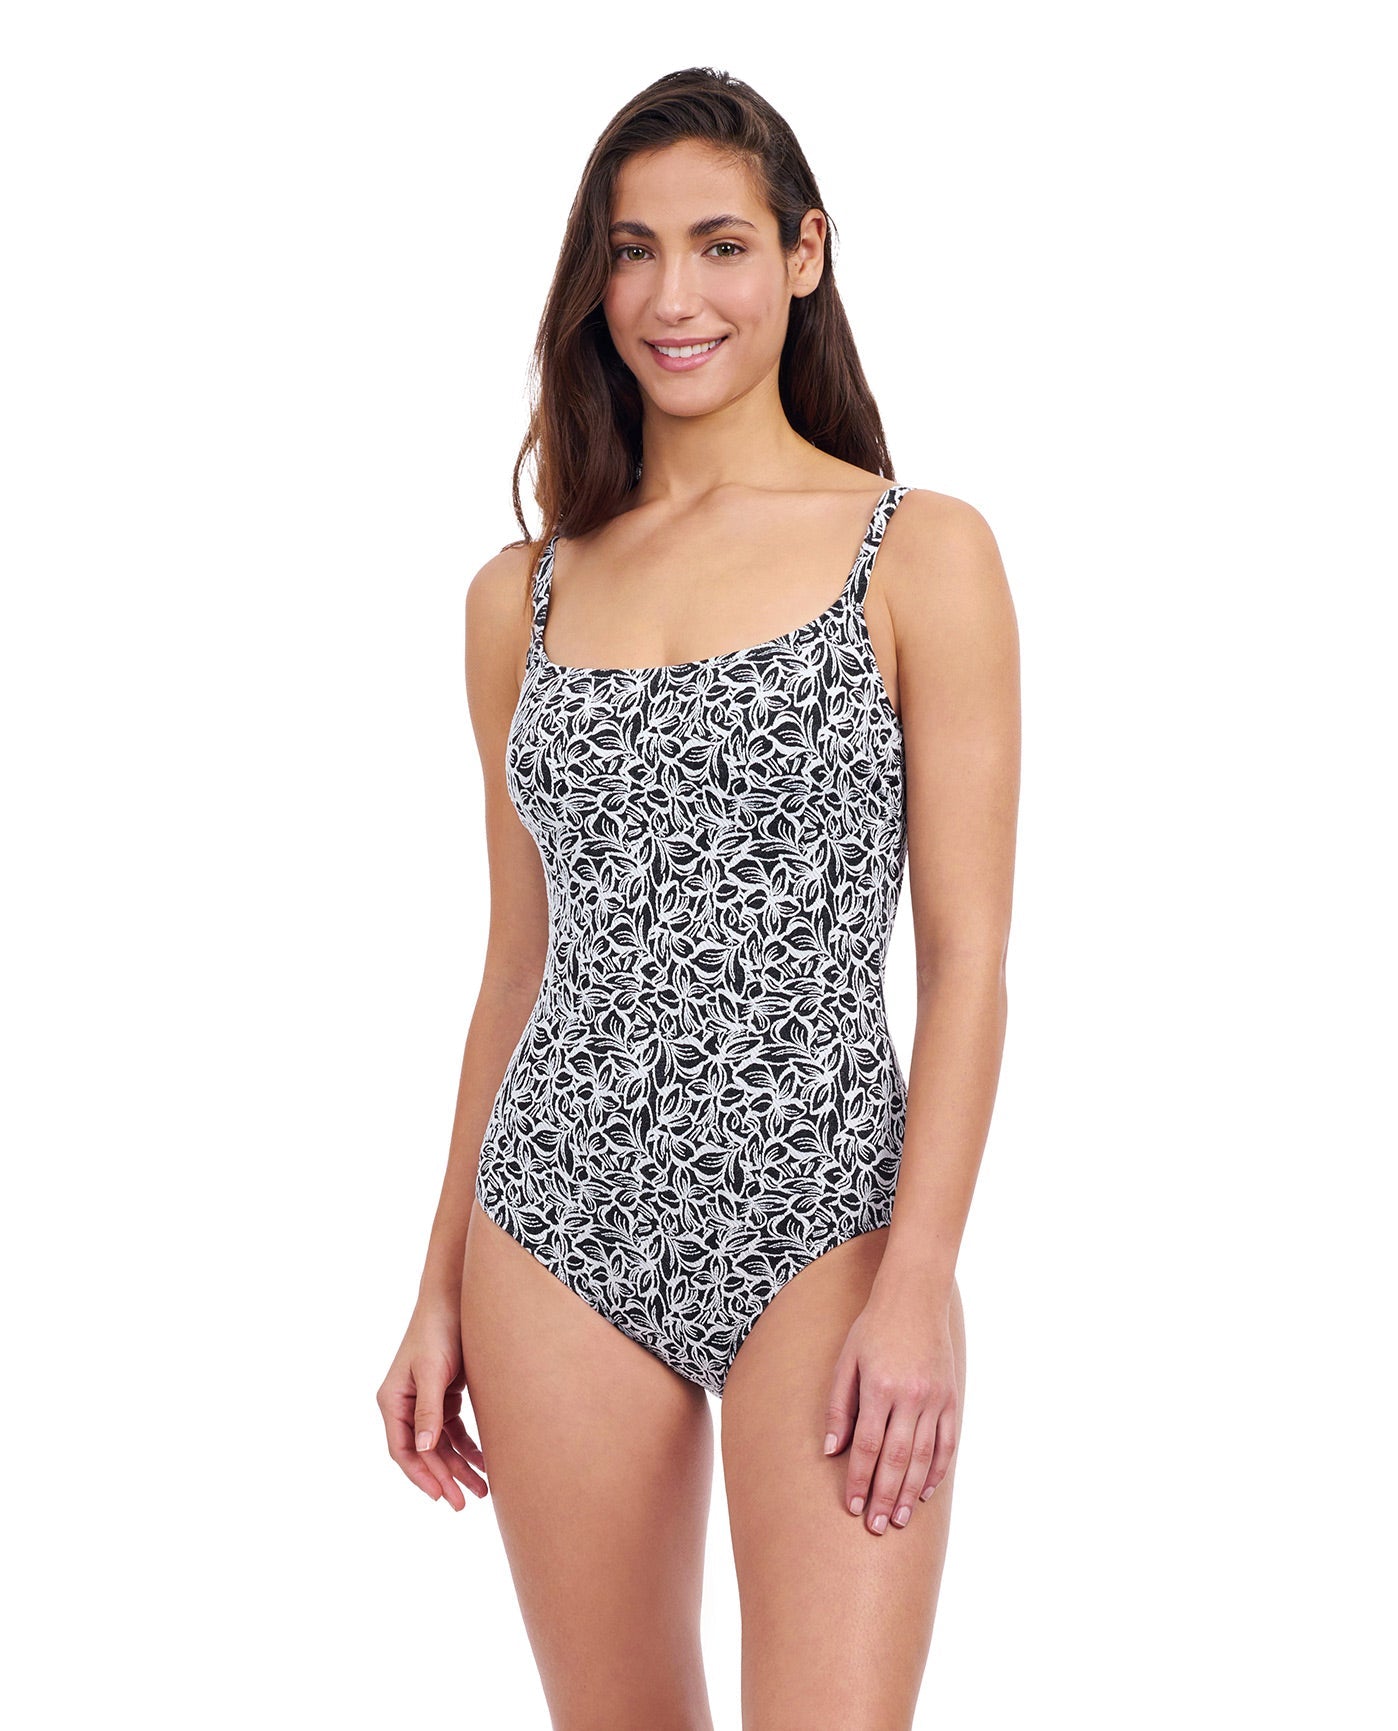 Front View of Profile By Gottex Plumeria D-Cup Textured Square Neck One Piece Swimsuit | PROFILE PLUMERIA BLACK AND WHITE